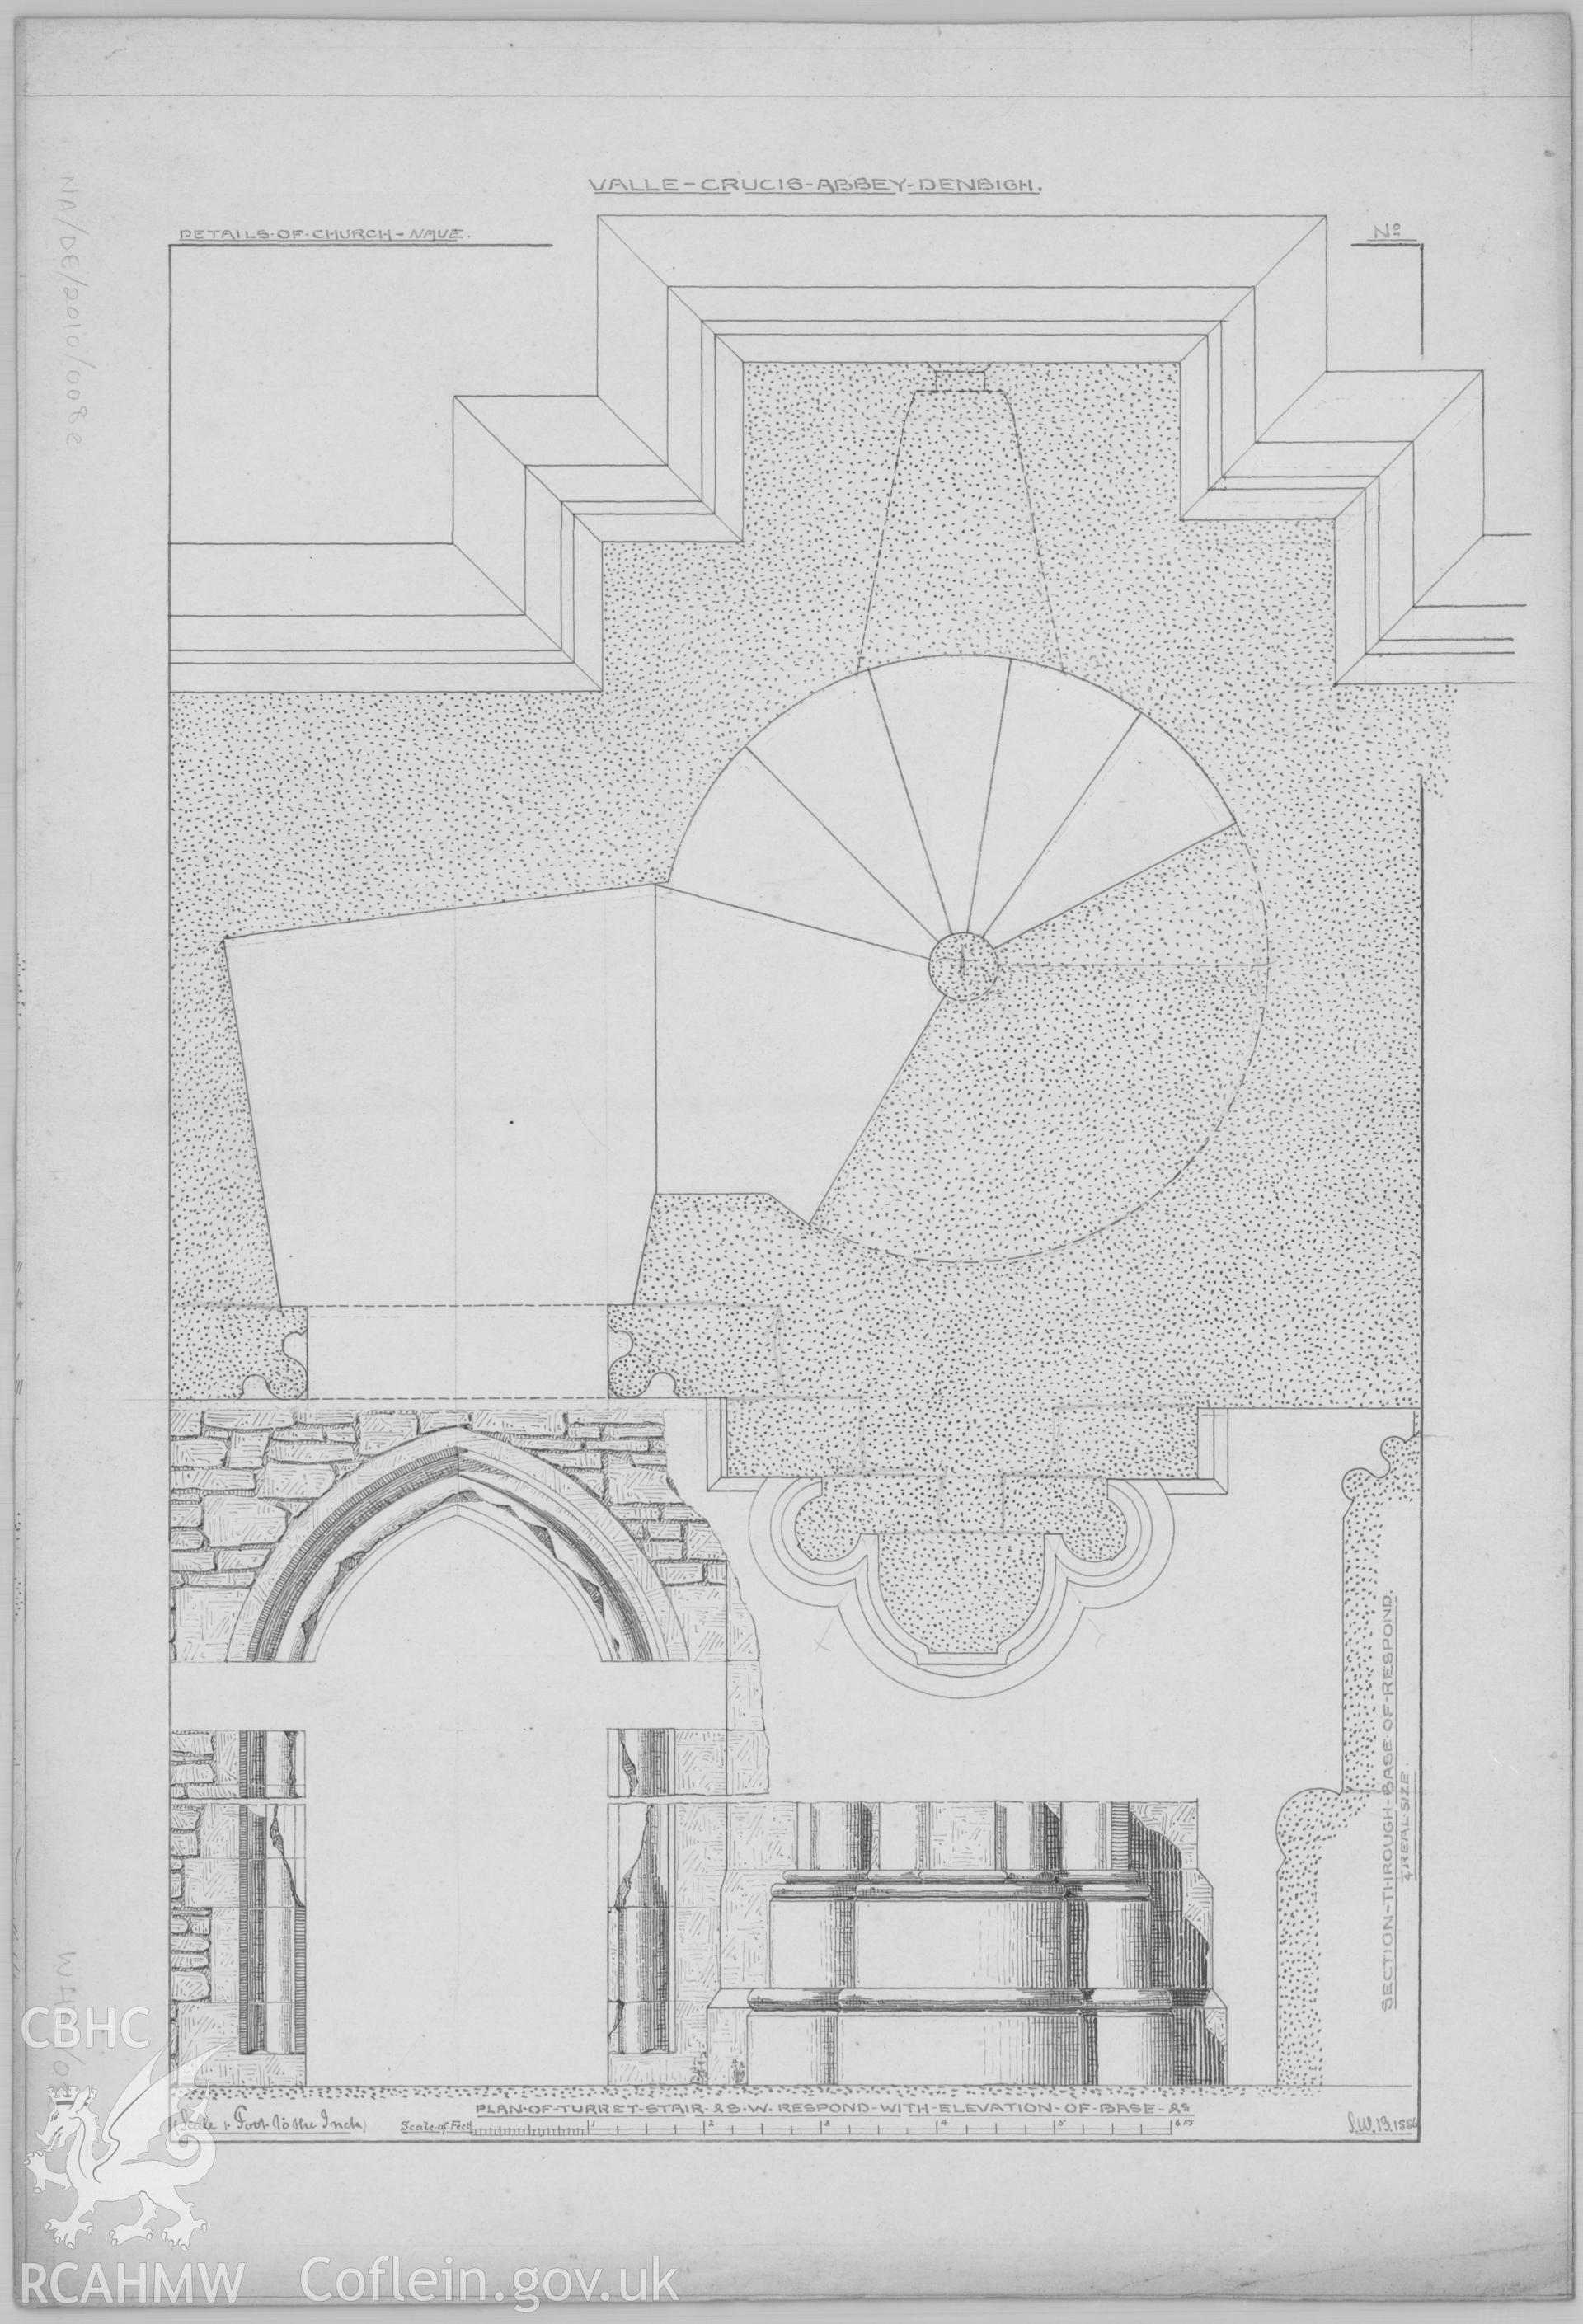 Original architectural drawing in pencil and ink showing details of the Church Nave at Valle Crucis Abbey, including a plan of the turret stair and SW respond with elevation of the base. Produced by Hayward Brakspear and Sons in 1886.